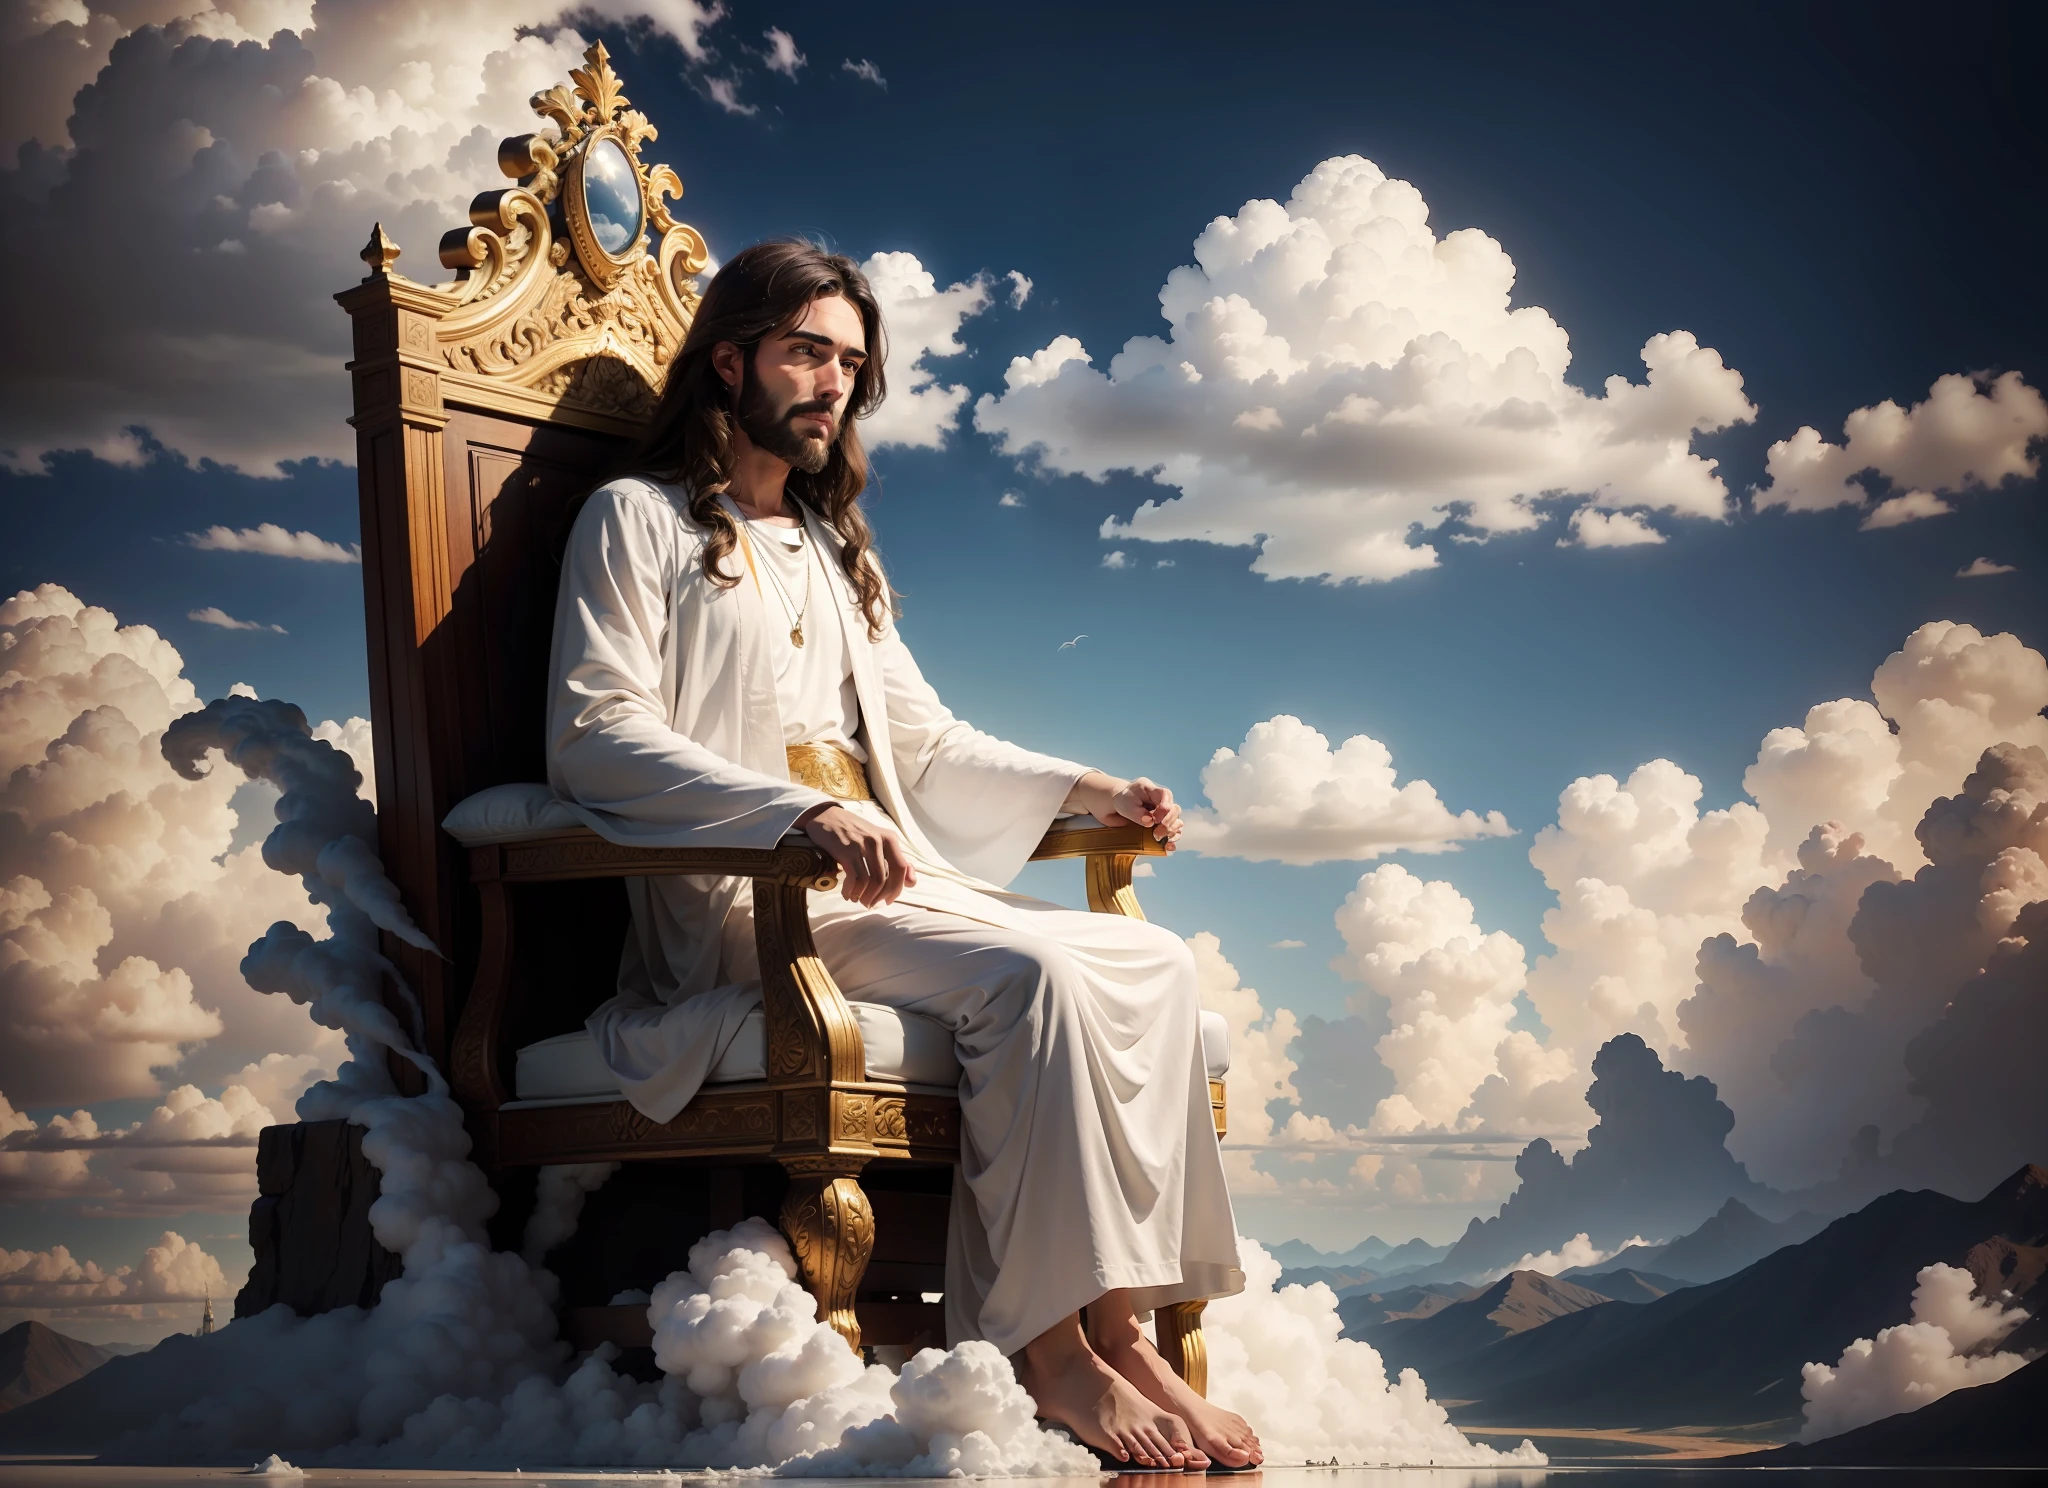 Jesus sitting on the throne in the clouds